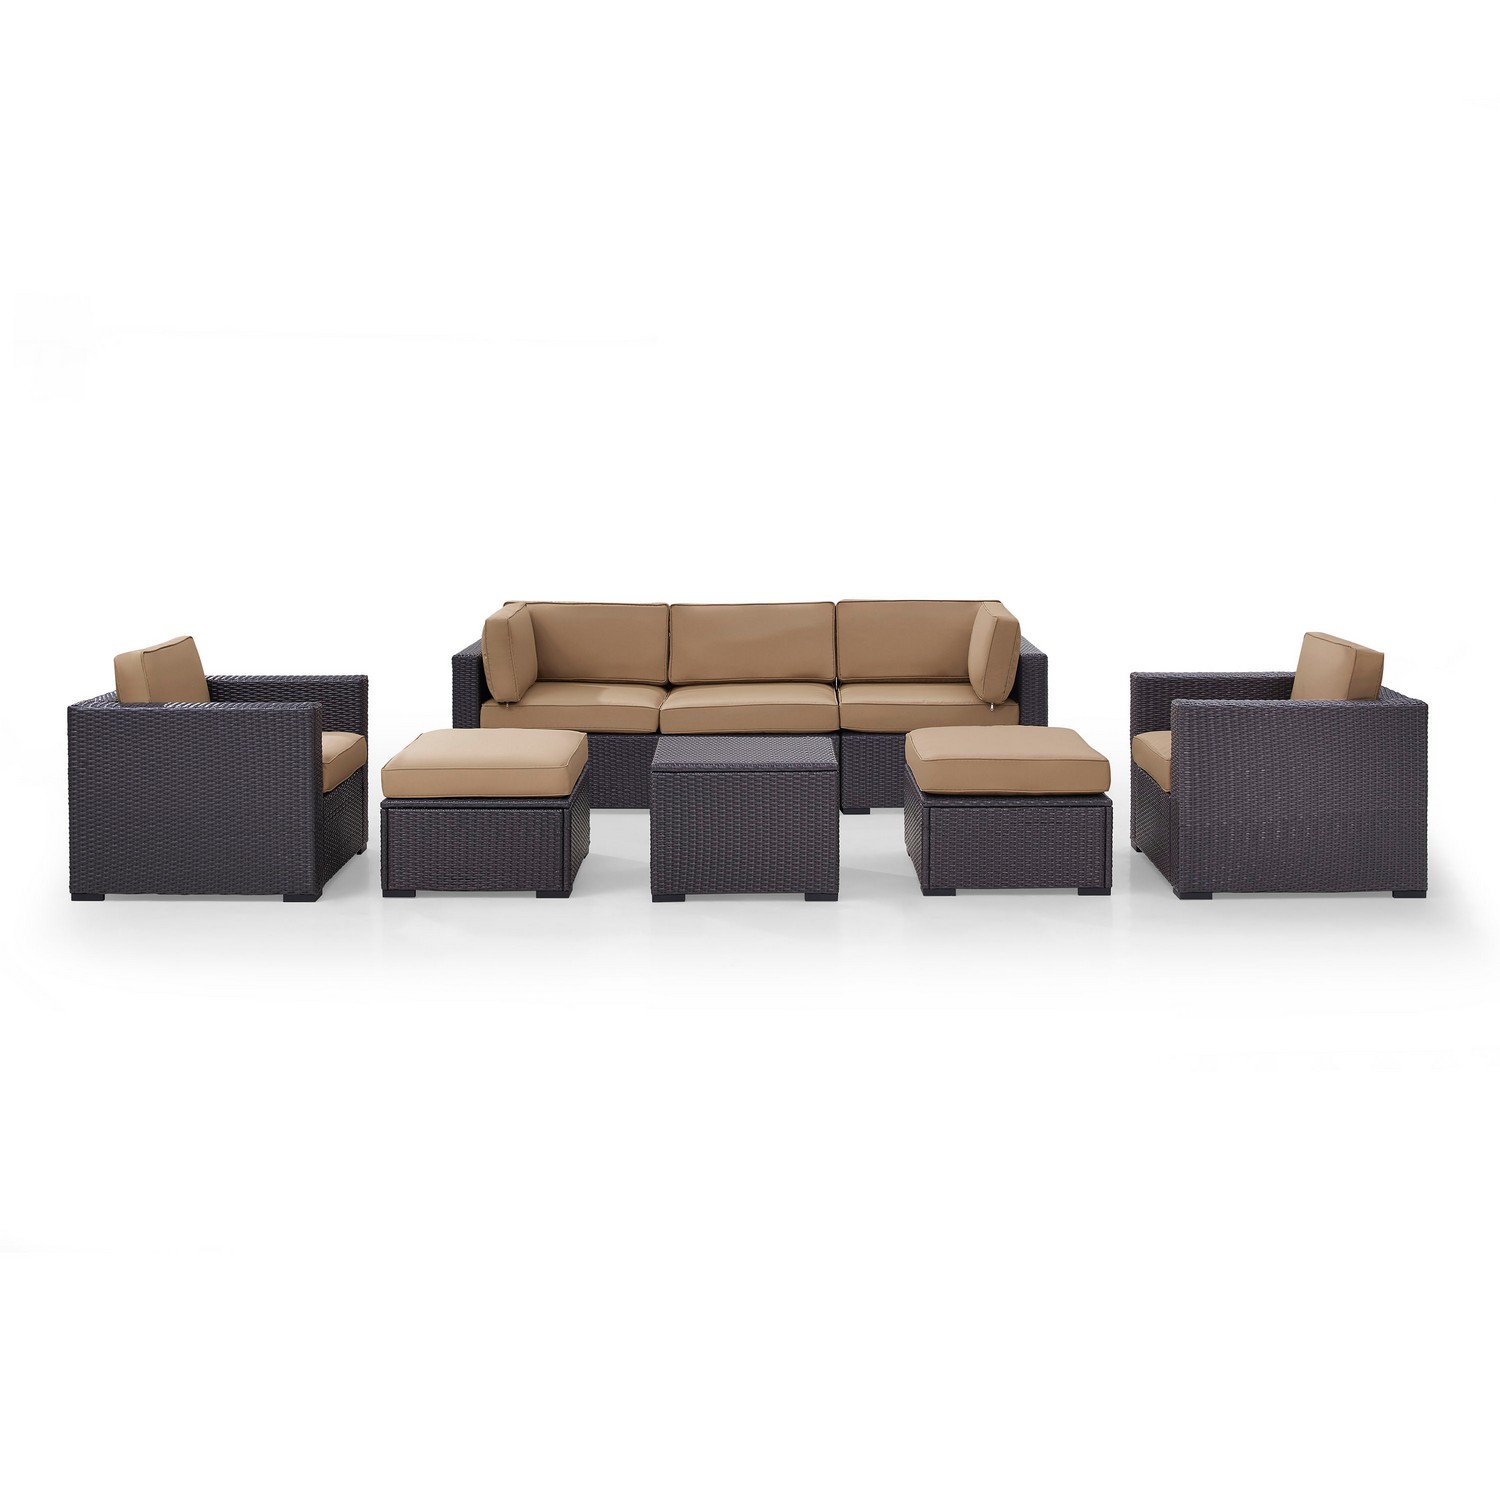 Crosley Biscayne 7-PC Outdoor Wicker Sectional Set - Loveseat, 2 Arm Chairs, Corner Chair, Coffee Table, 2 Ottomans - Mocha/Brown